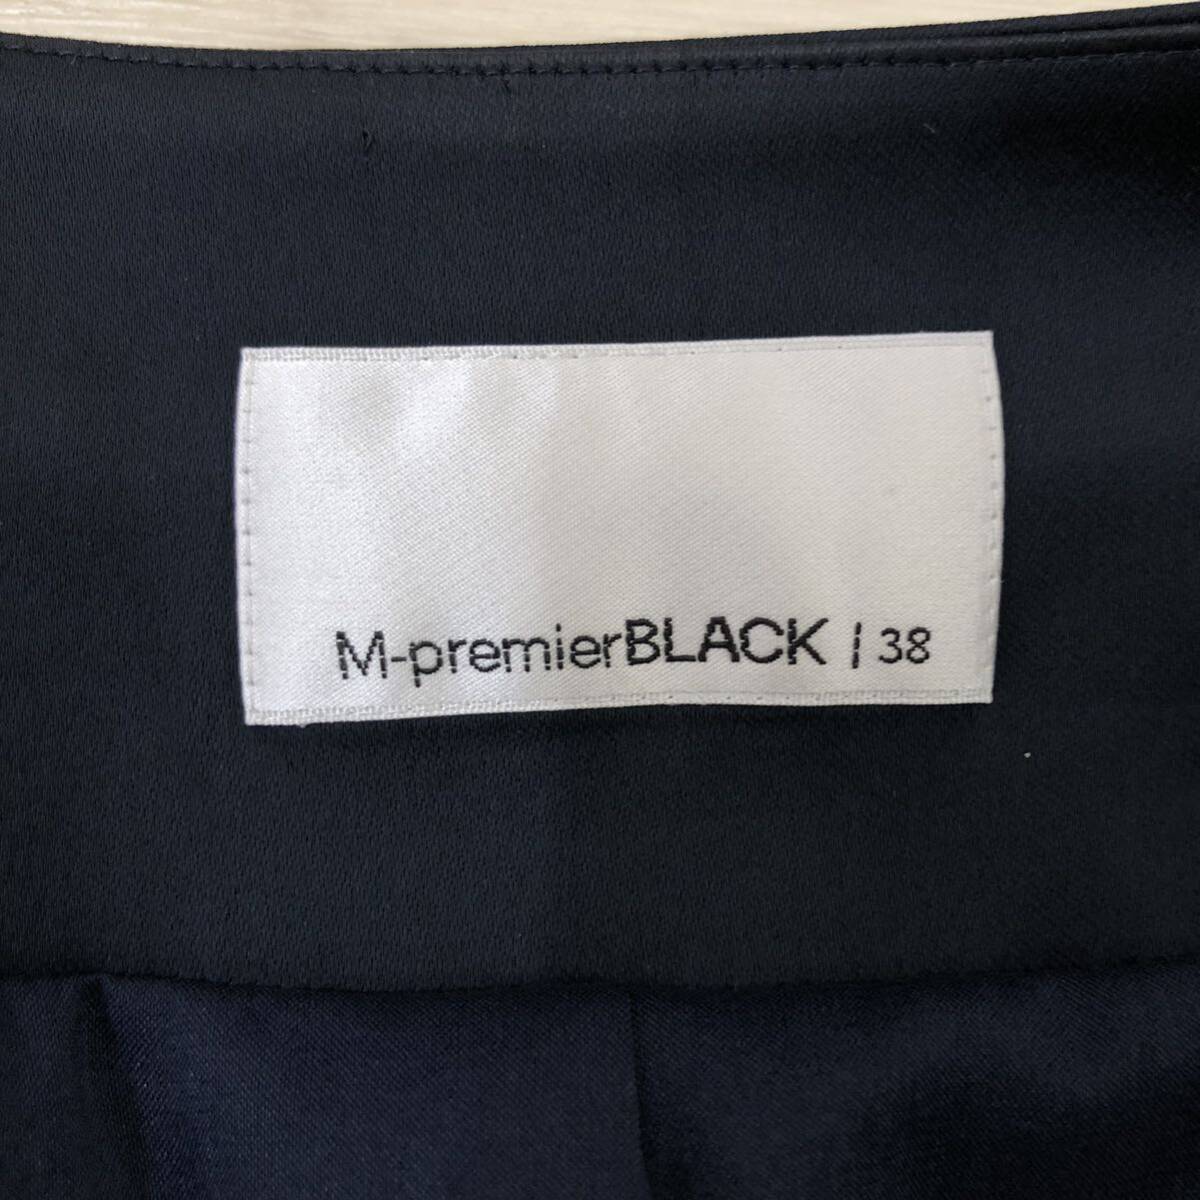 NB212 M-premier BLACK M pull mie black no color jacket outer outer garment feather weave long sleeve tweed navy navy blue lady's 38